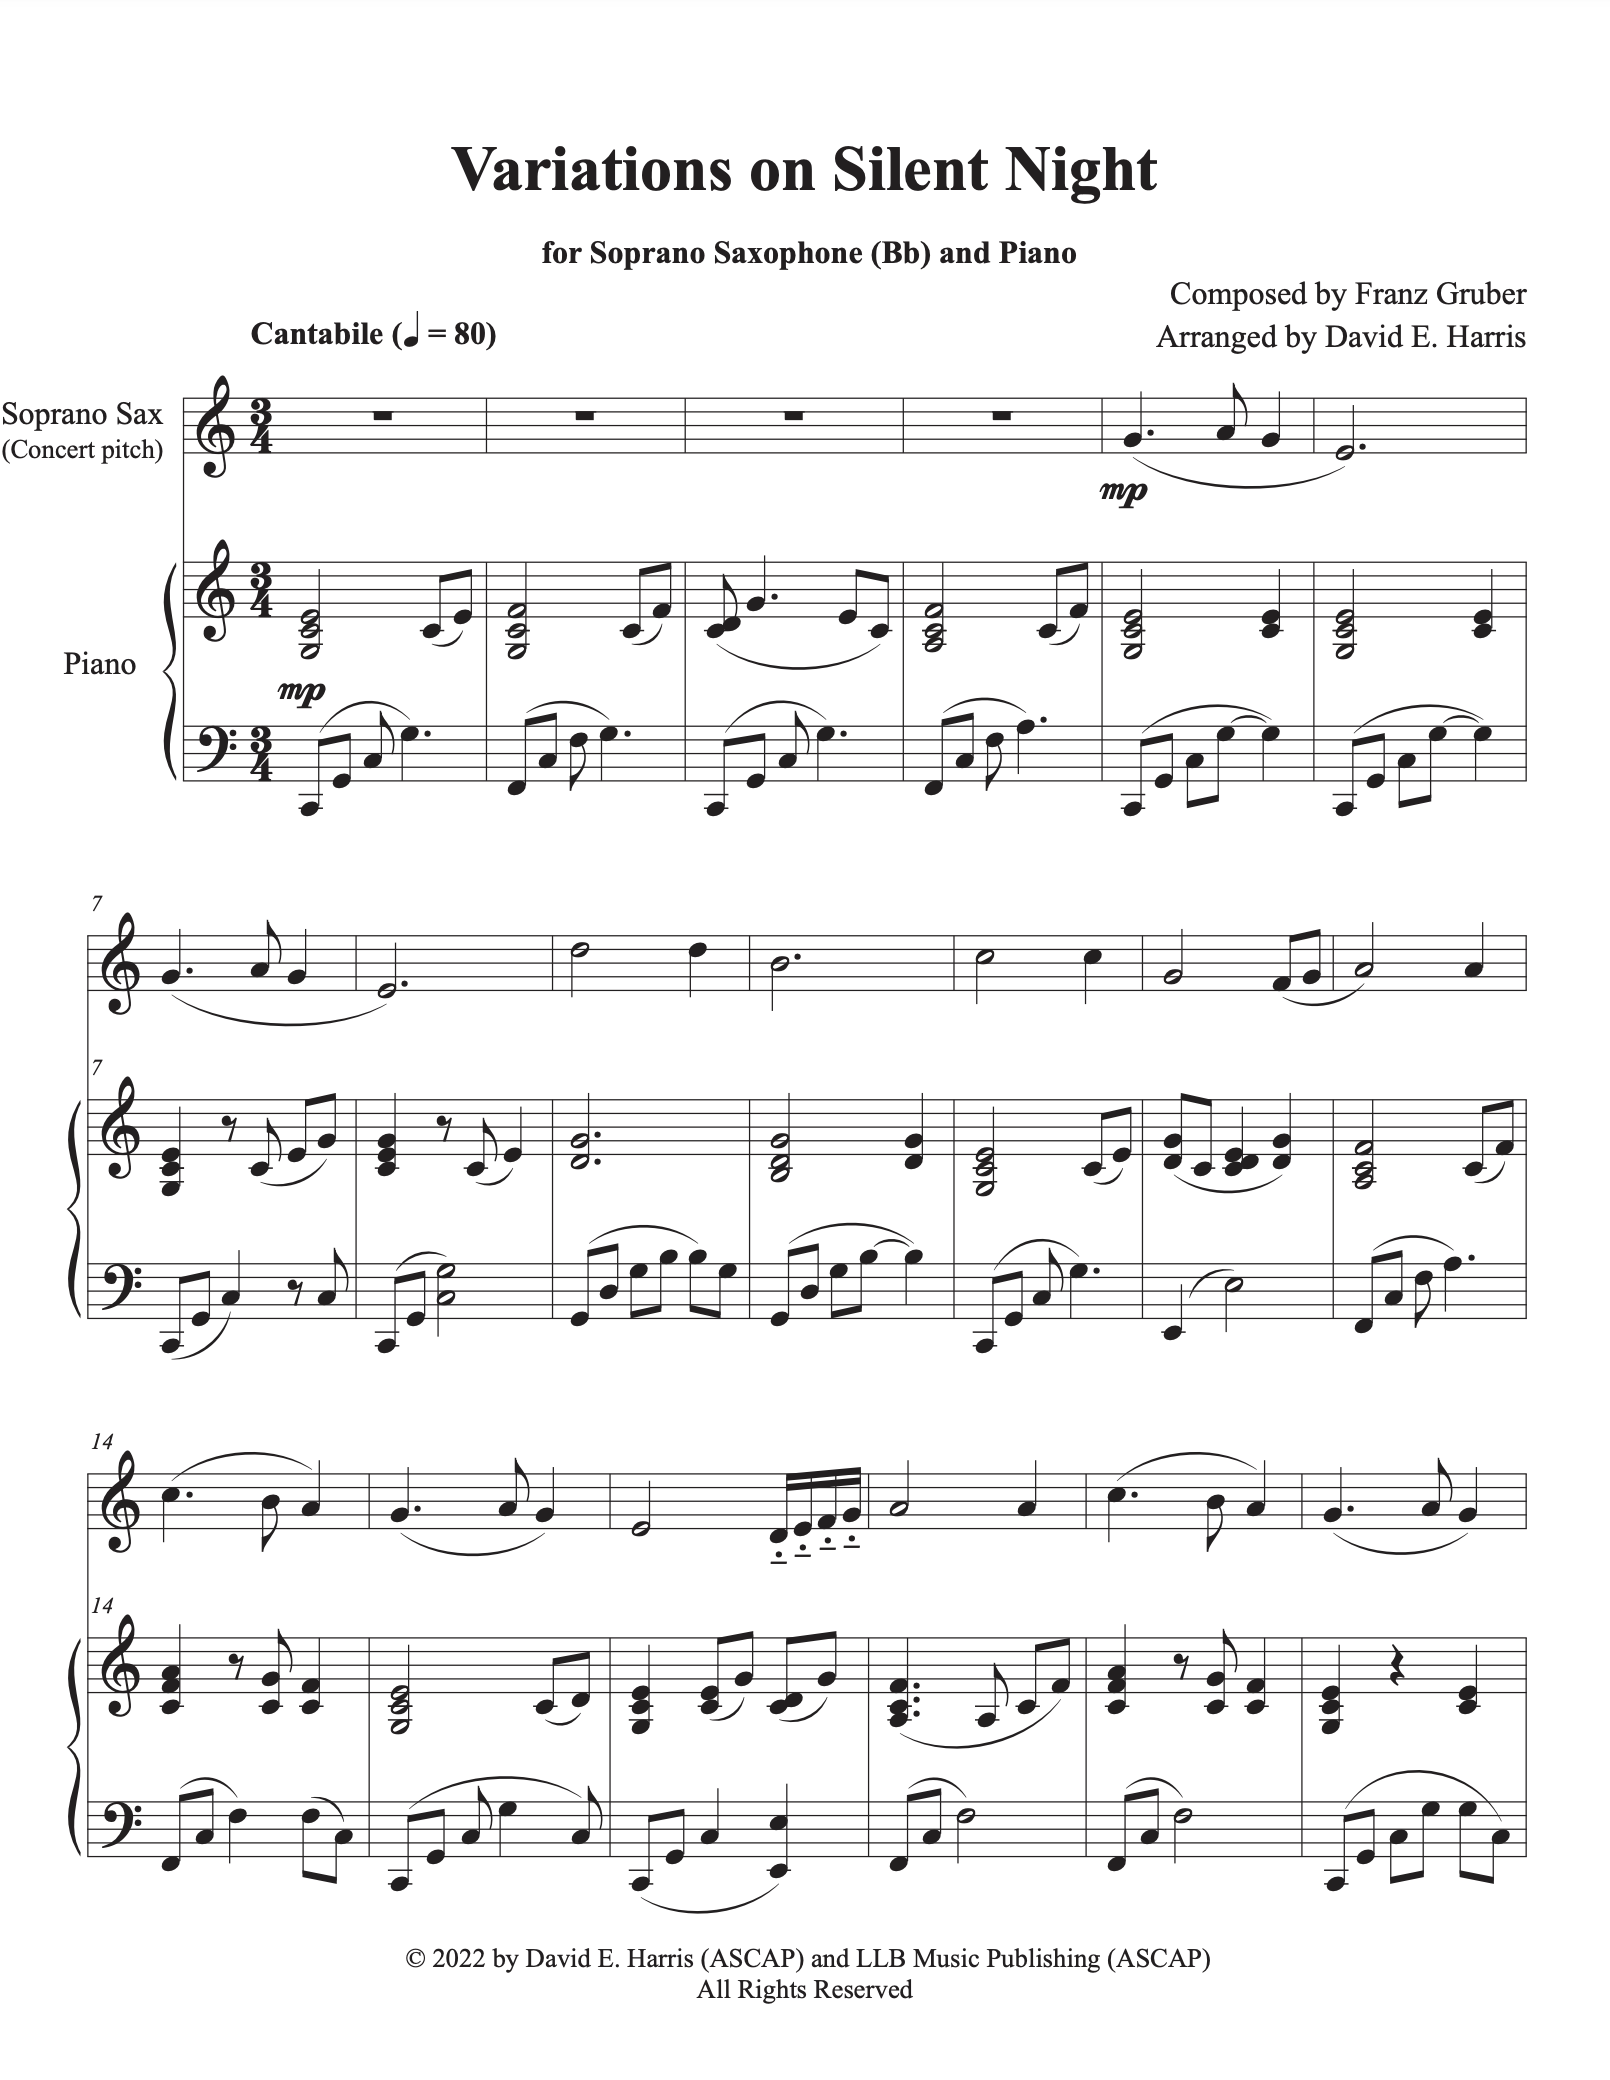 Variations on Silent Night for Soprano Saxophone (Bb) and Piano